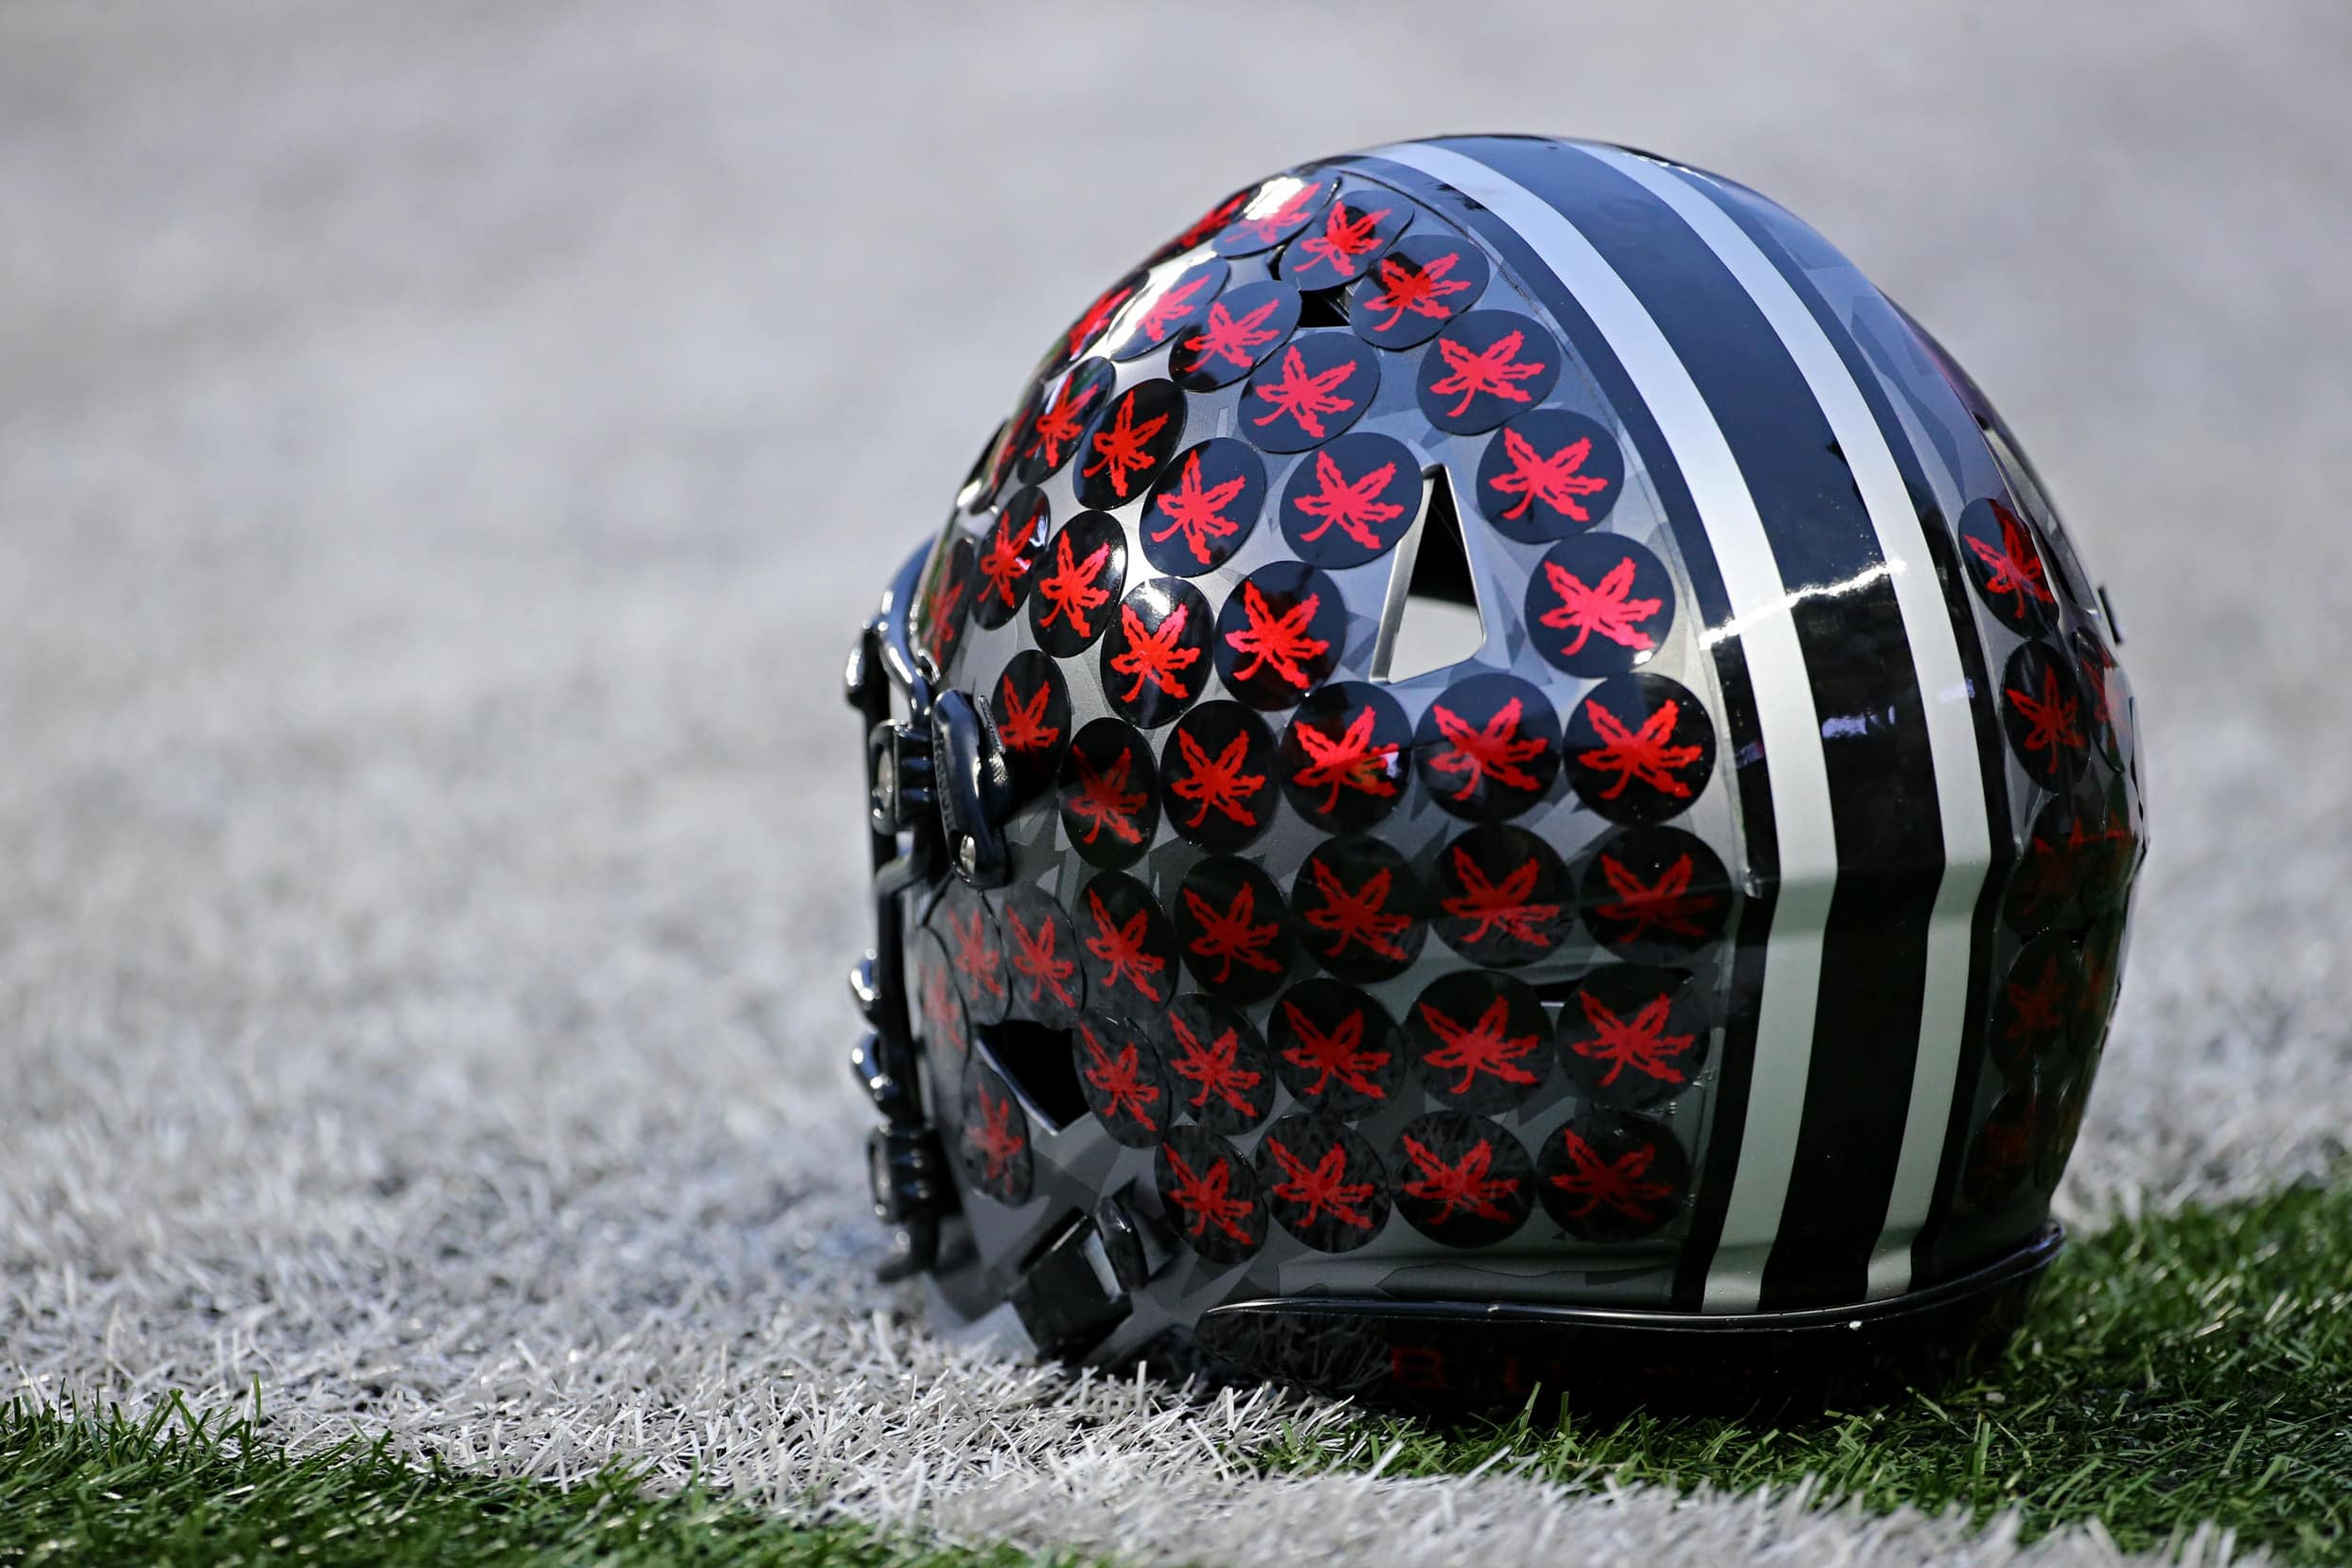 LOOK: Ohio State blackout uniforms for Nebraska game are amazing